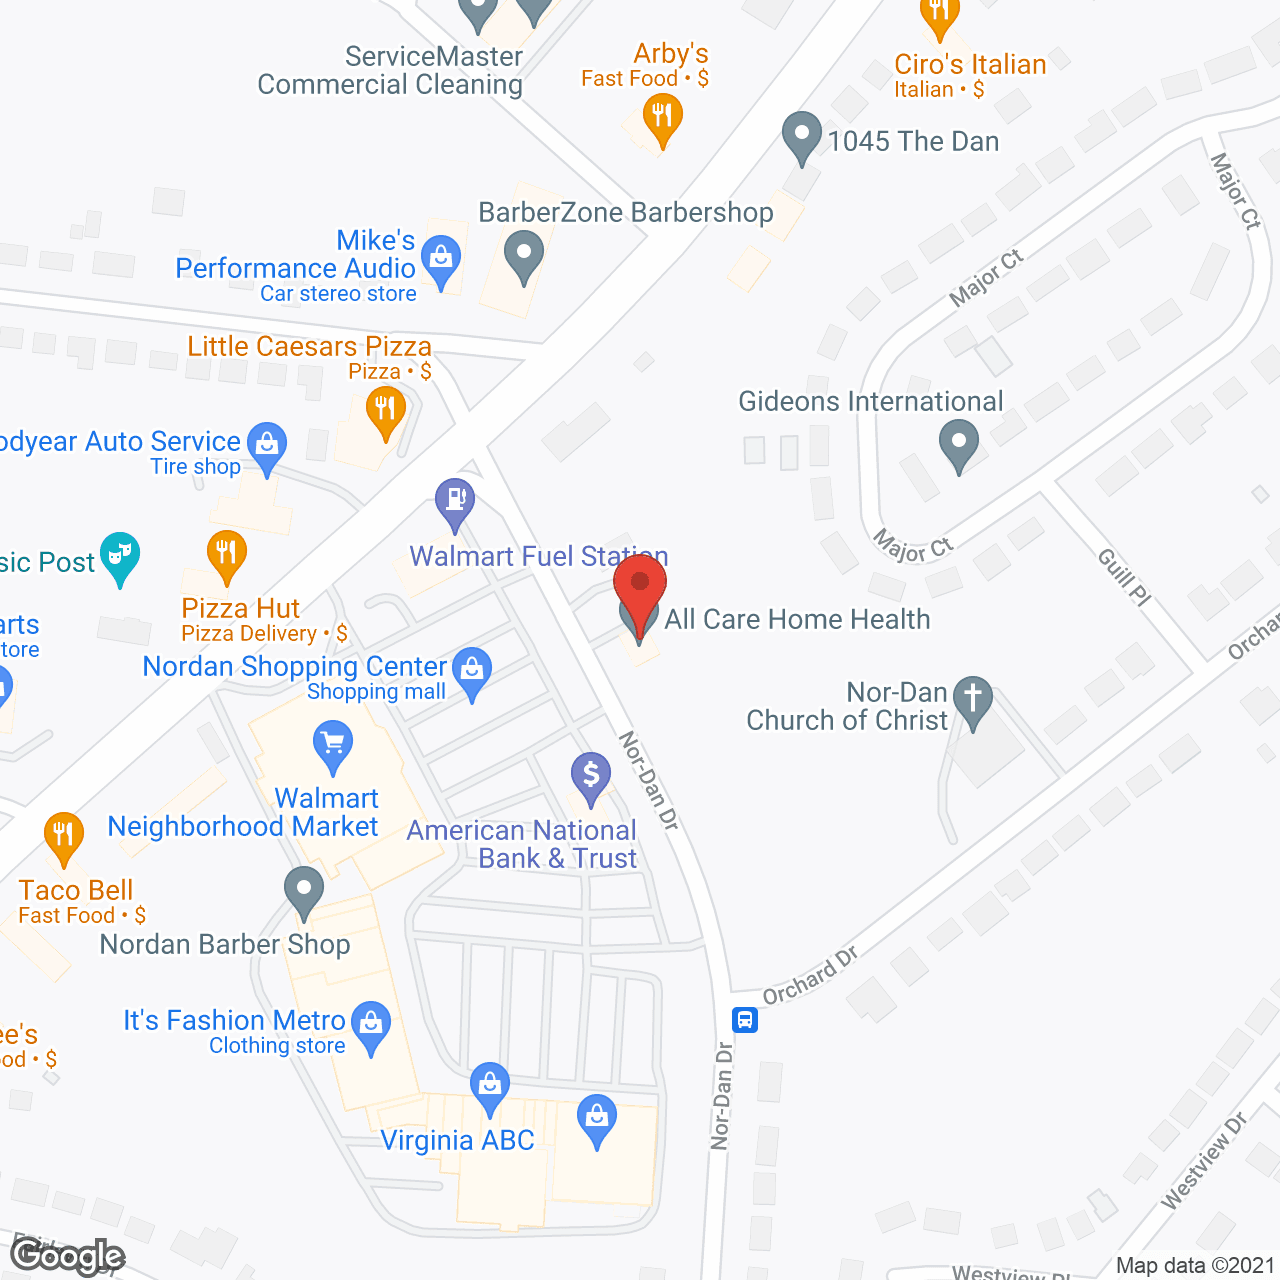 All Care Home Health in google map